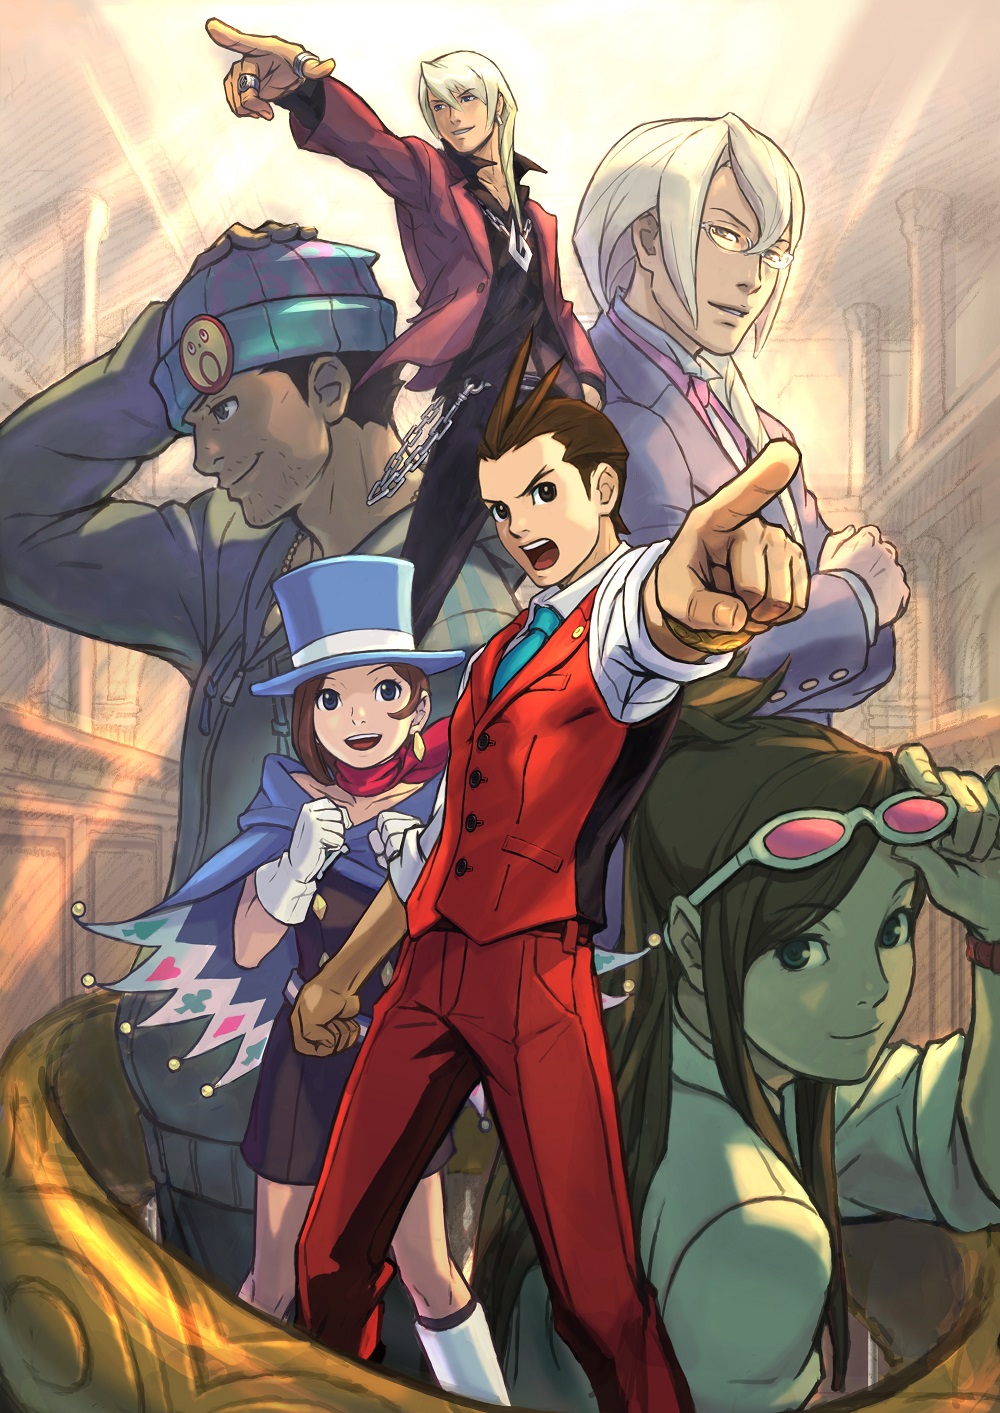 http://www.perfectly-nintendo.com/wp-content/gallery/apollo-justice-ace-attorney-09-08-2017/2.jpg